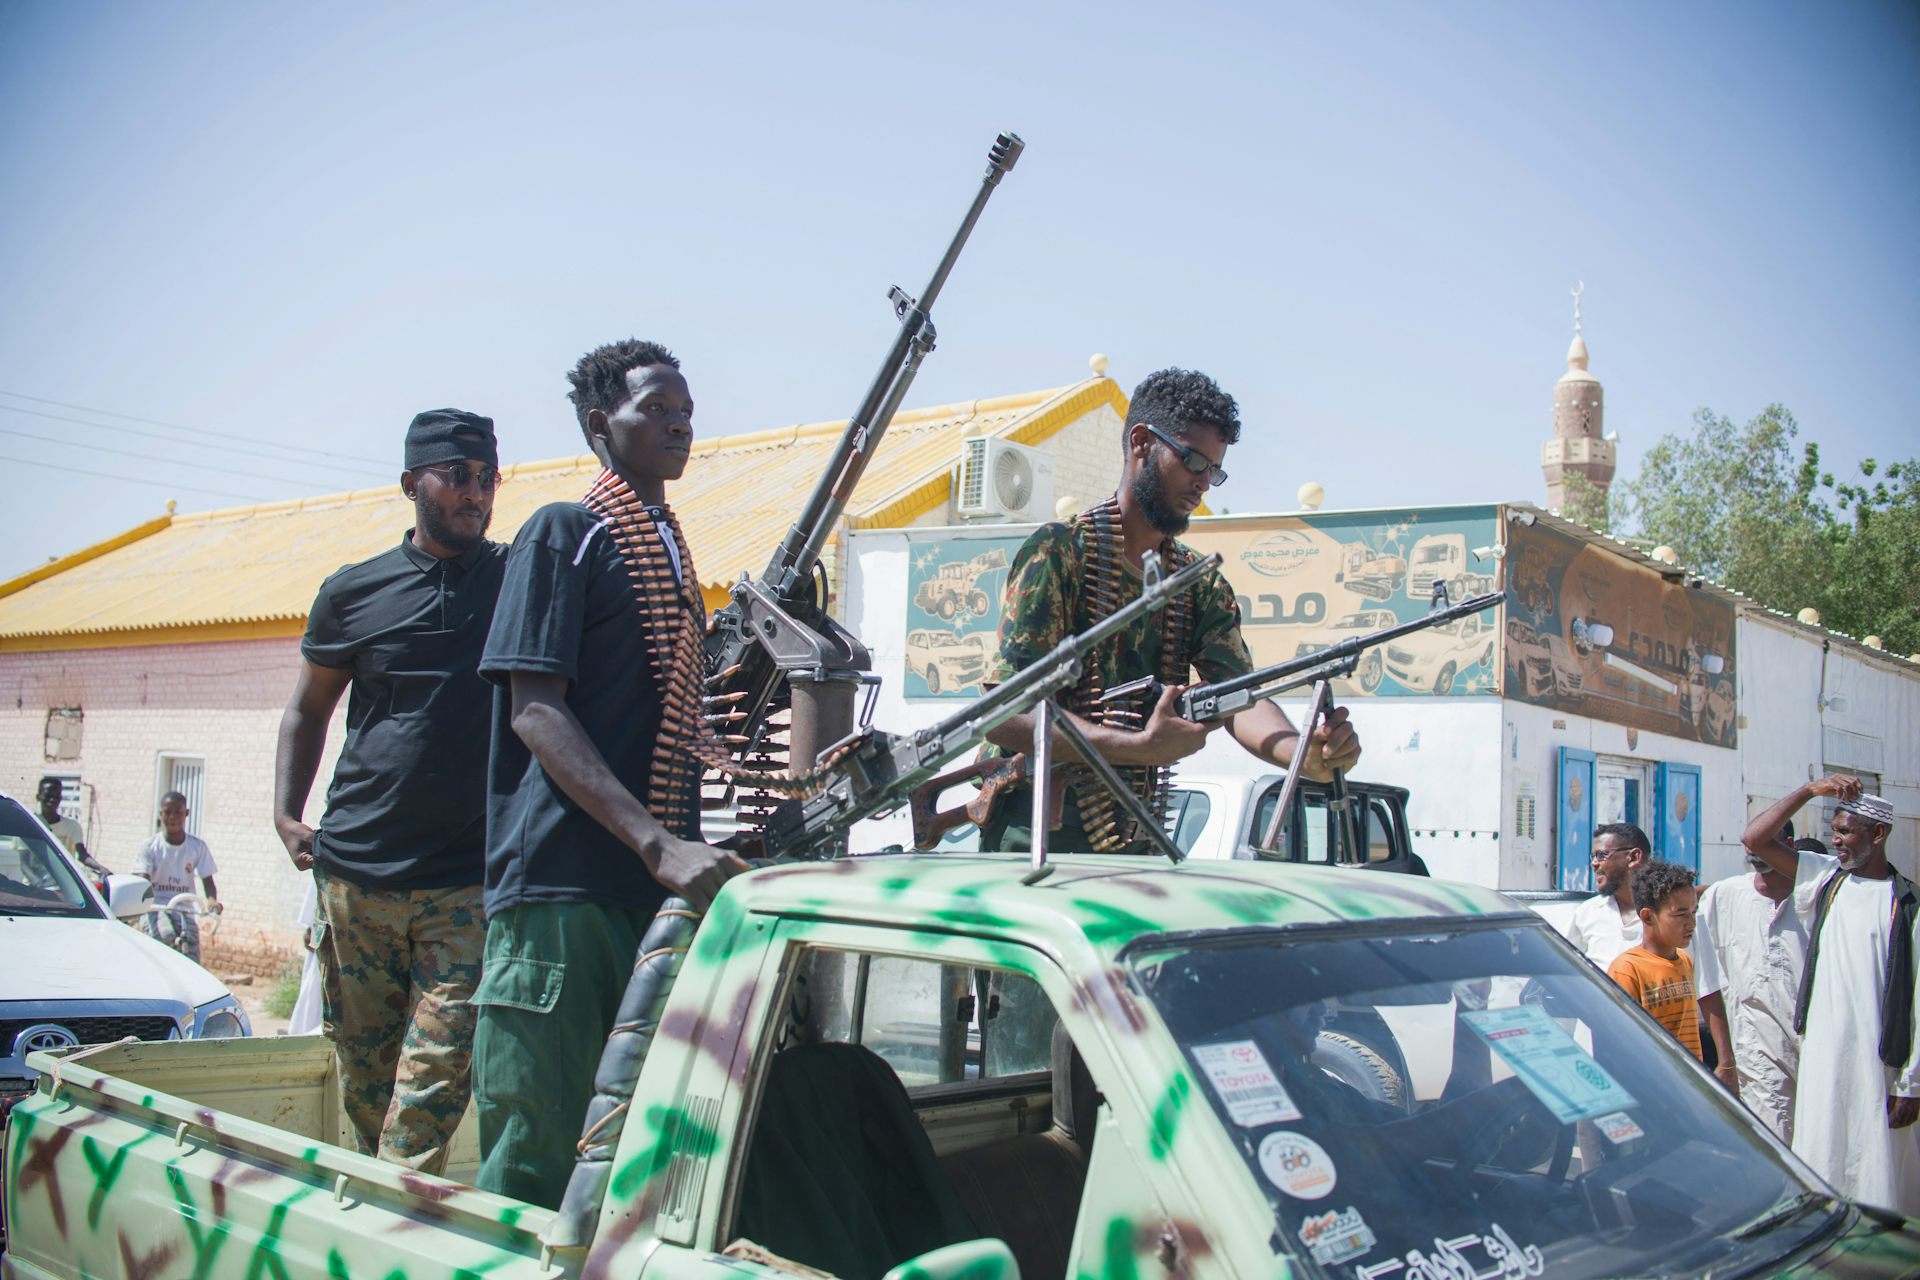 Iran’s Intervention in Sudan’s Civil War Advances Its Geopolitical Goals − But Not Without Risks